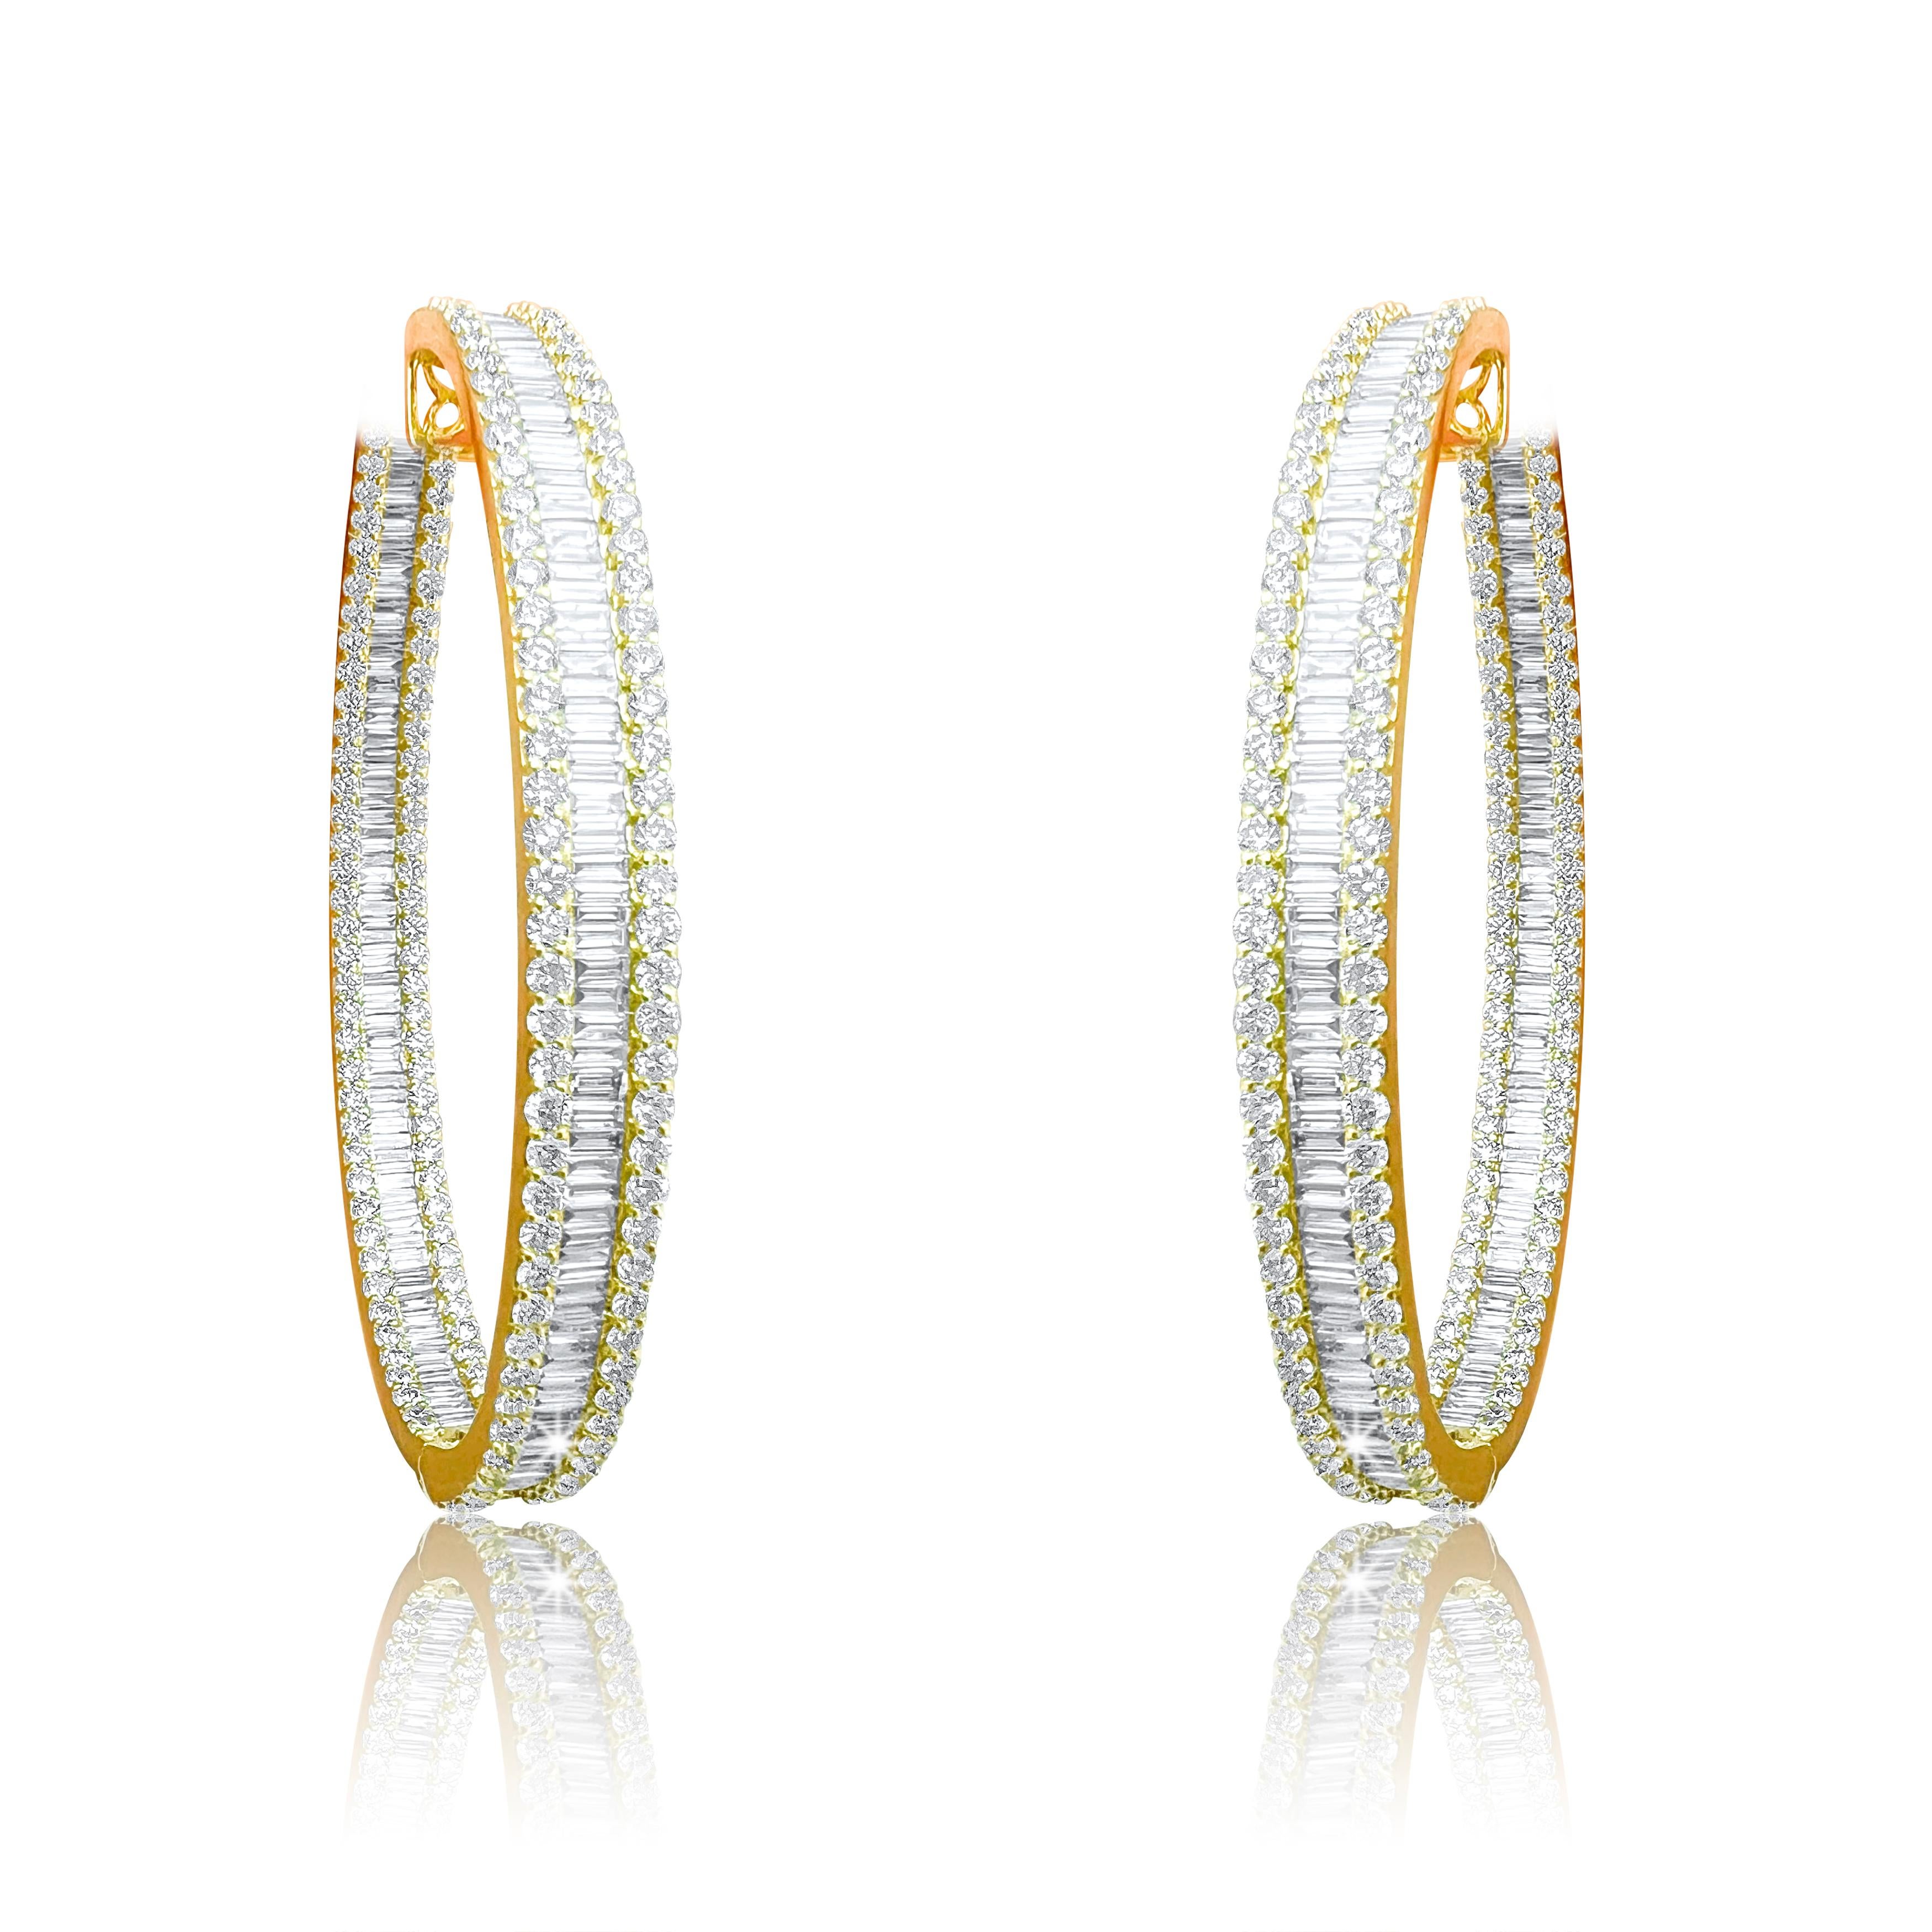 Earring Information
Metal Purity : 18K
Color : Yellow Gold, White Gold
Gold Weight : 27.40g
Length : 2'' Oval
Diamond Count : 256 Round Diamonds
Round Diamond Carat Weight : 6.85 ttcw
Baguette Diamonds Count : 141
Baguette Diamonds Carat Weight :